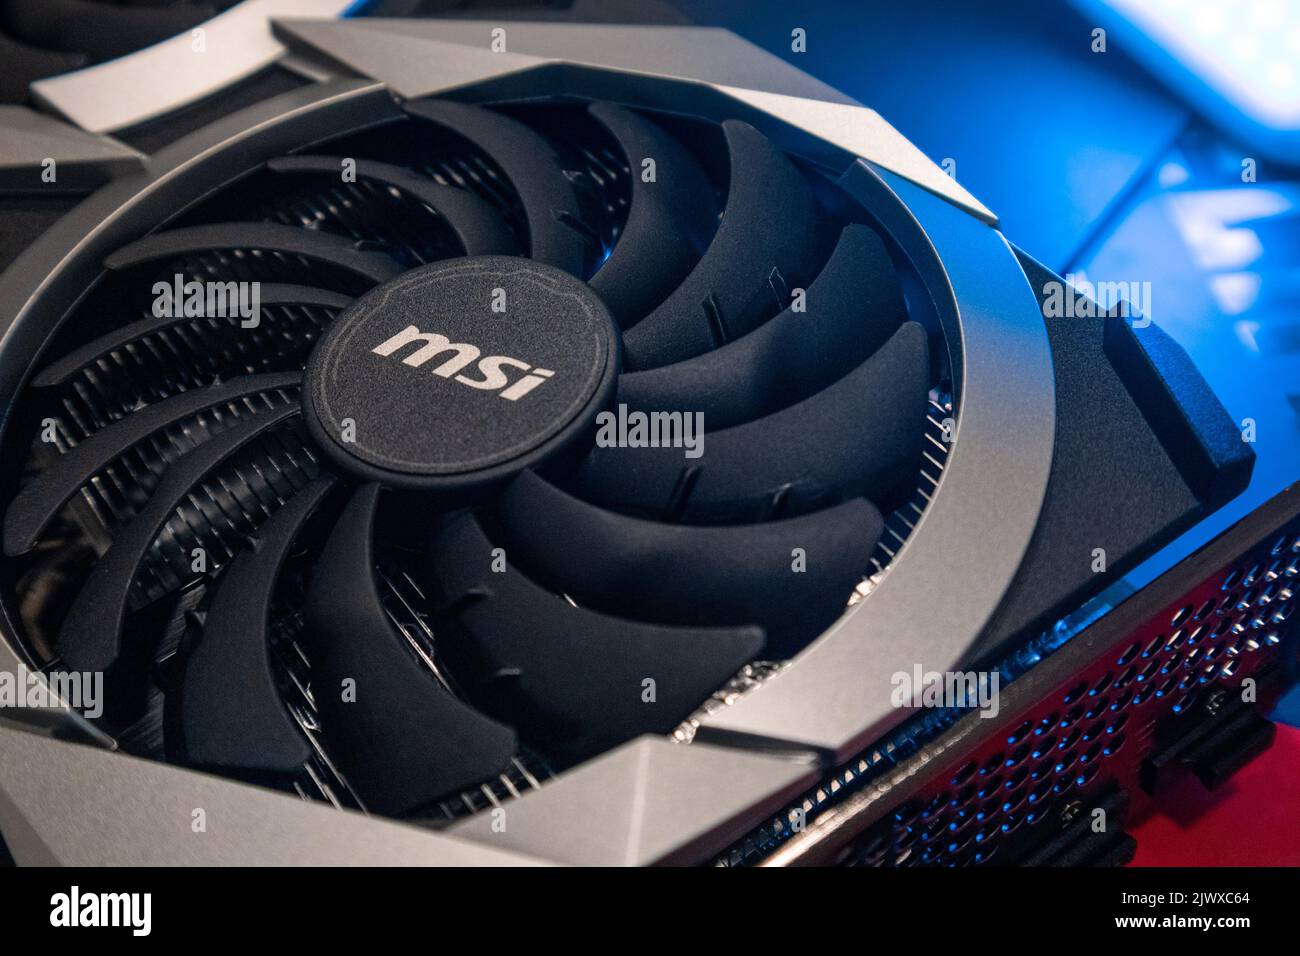 Kyiv, Ukraine - August 19, 2022: Cooler in blue light, MSI graphics card with AMD Radeon chipset, close-up with selective focus, computer equipment Stock Photo